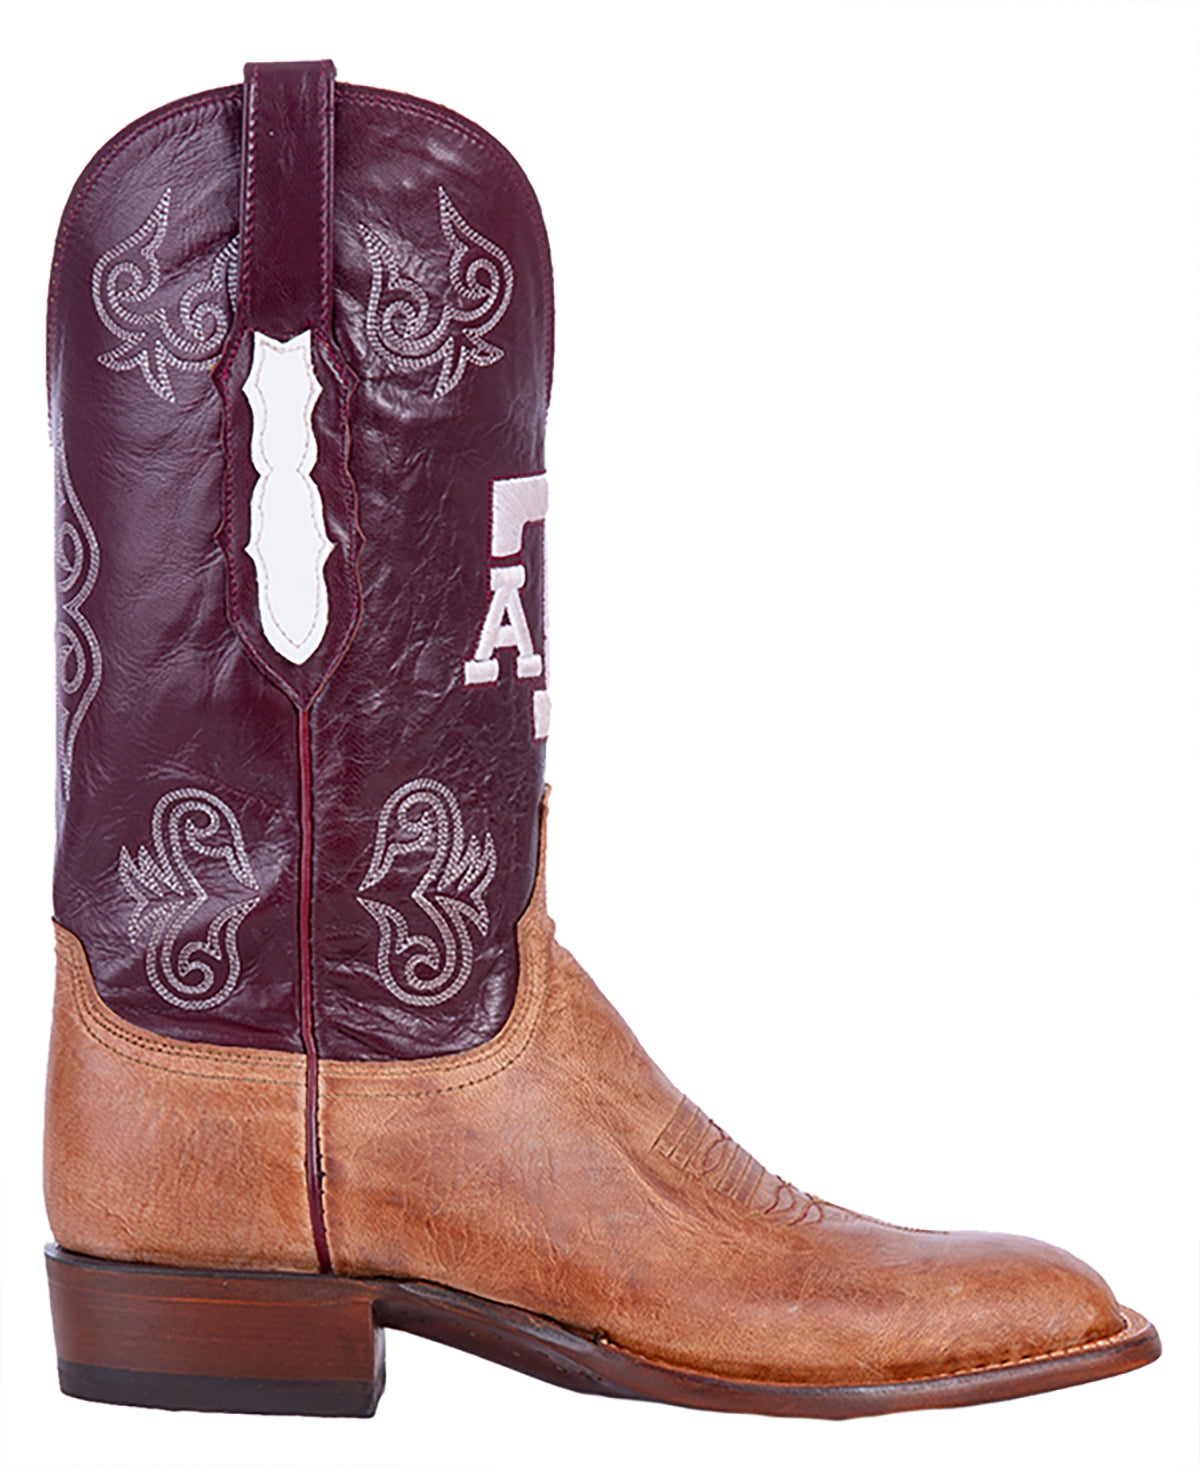 Texas A&M Lucchese Men's Maroon Boots